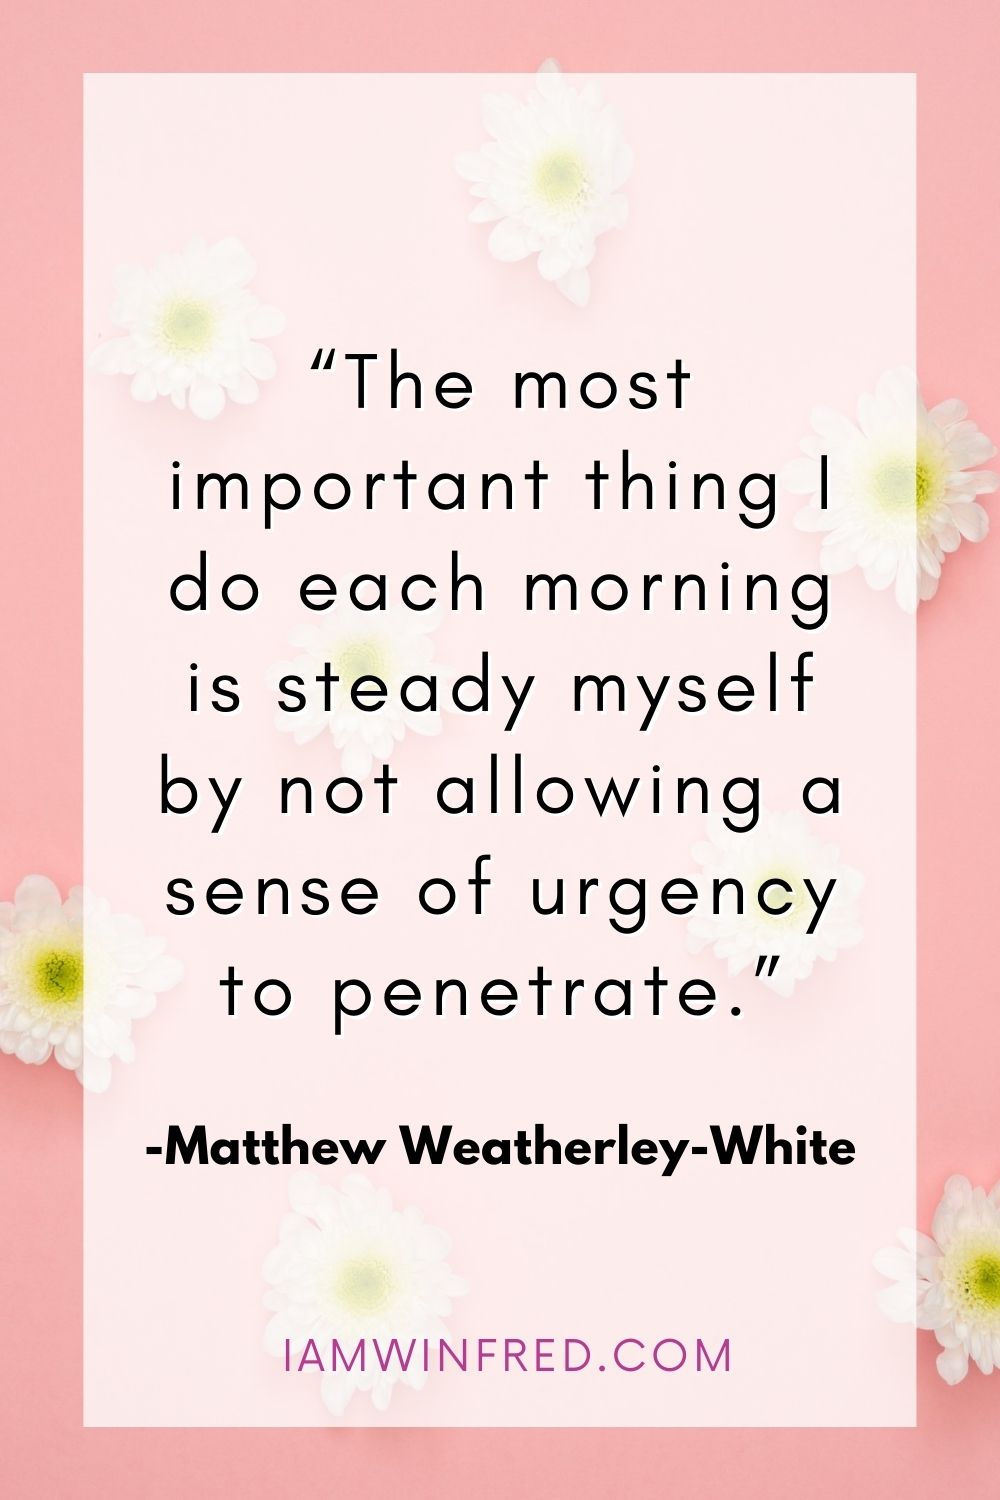 The Most Important Thing I Do Each Morning Is Steady Myself By Not Allowing A Sense Of Urgency To Penetrate.